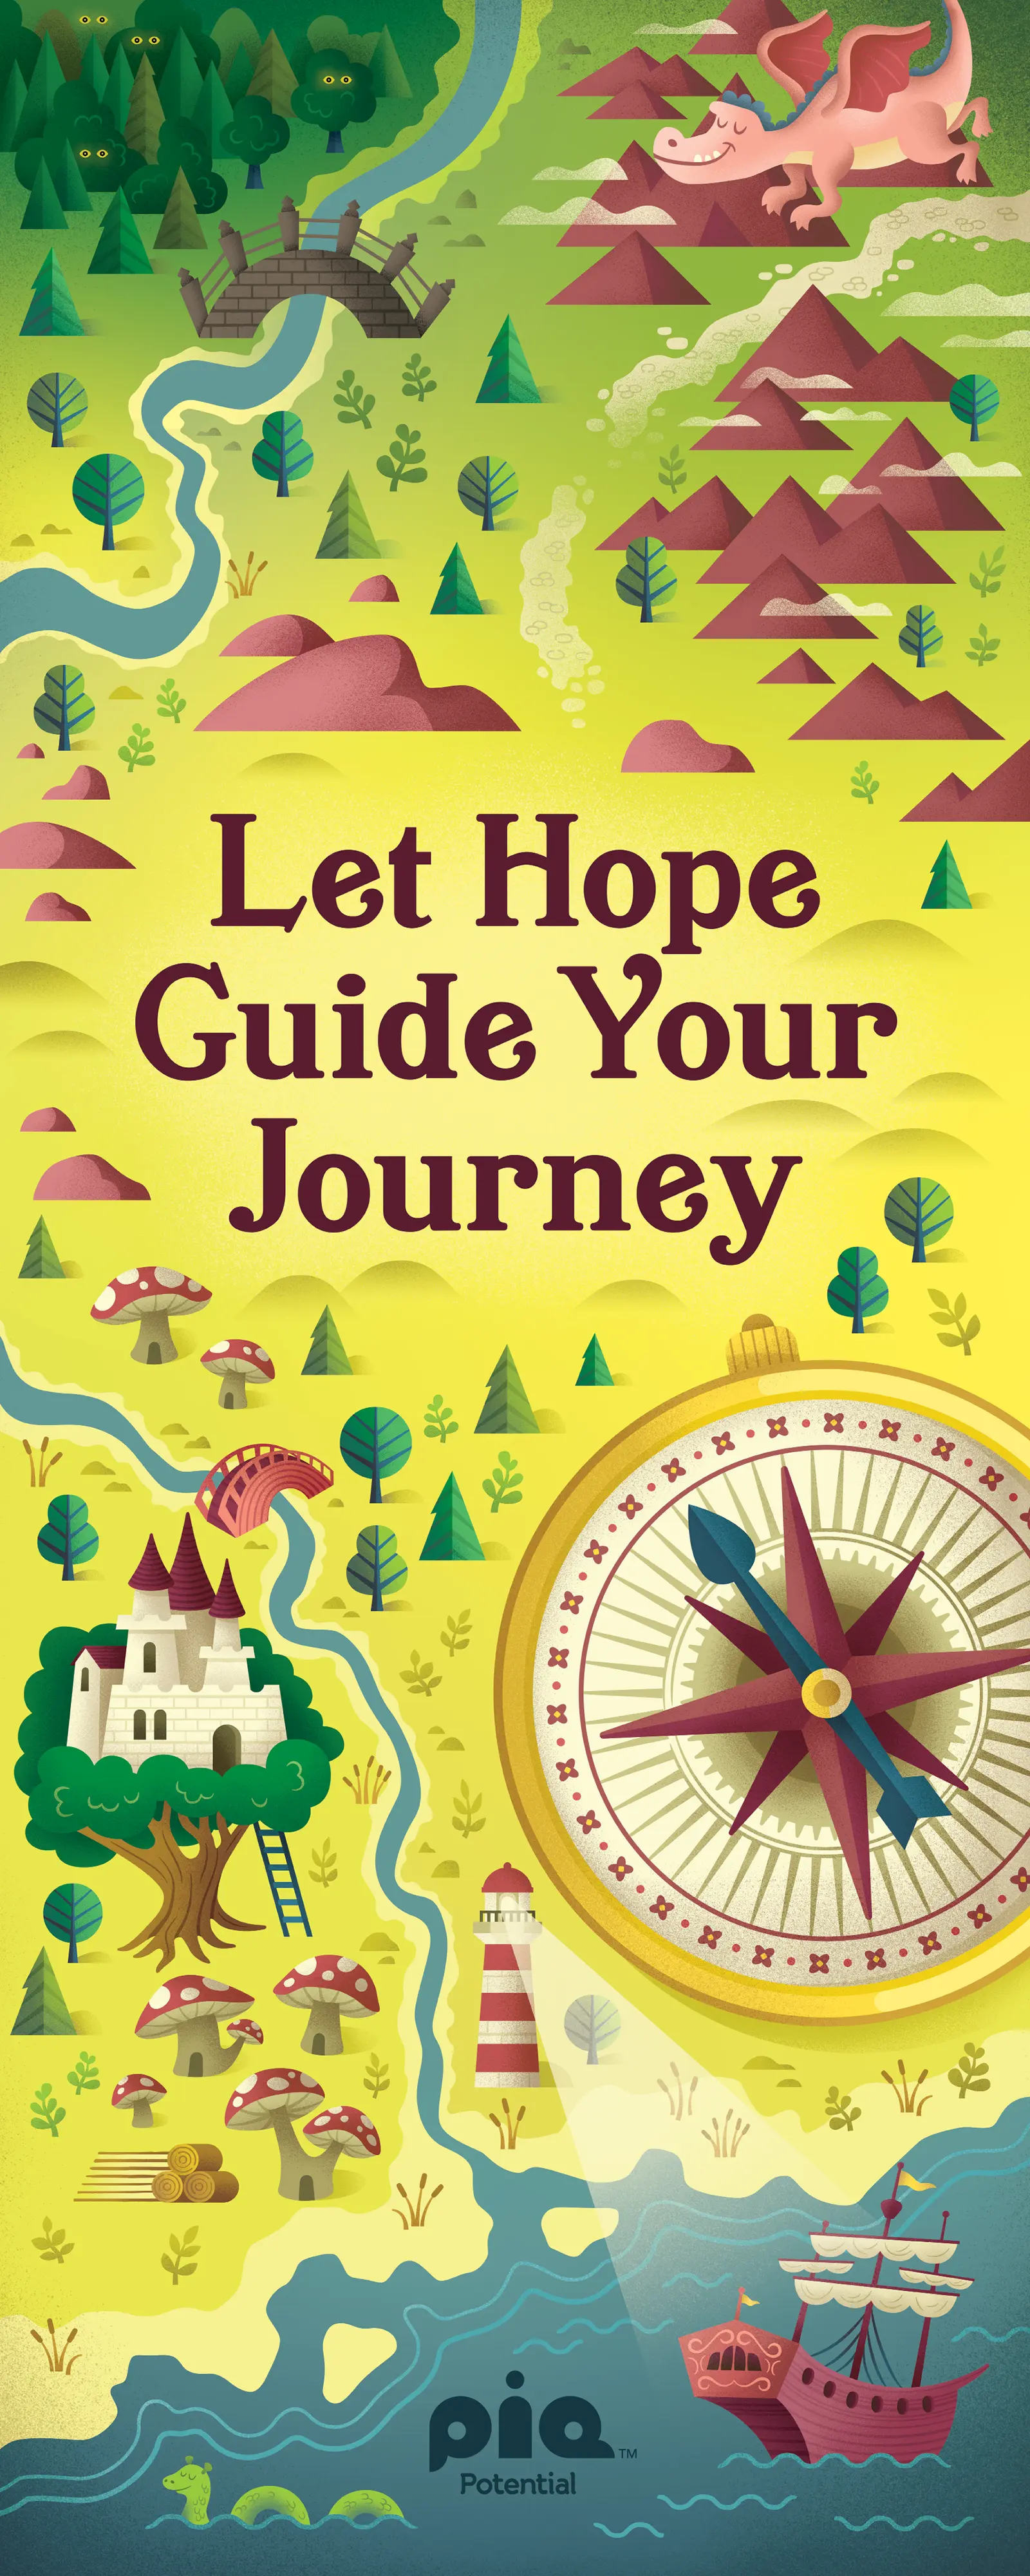 Let Hope Guide Your Journey